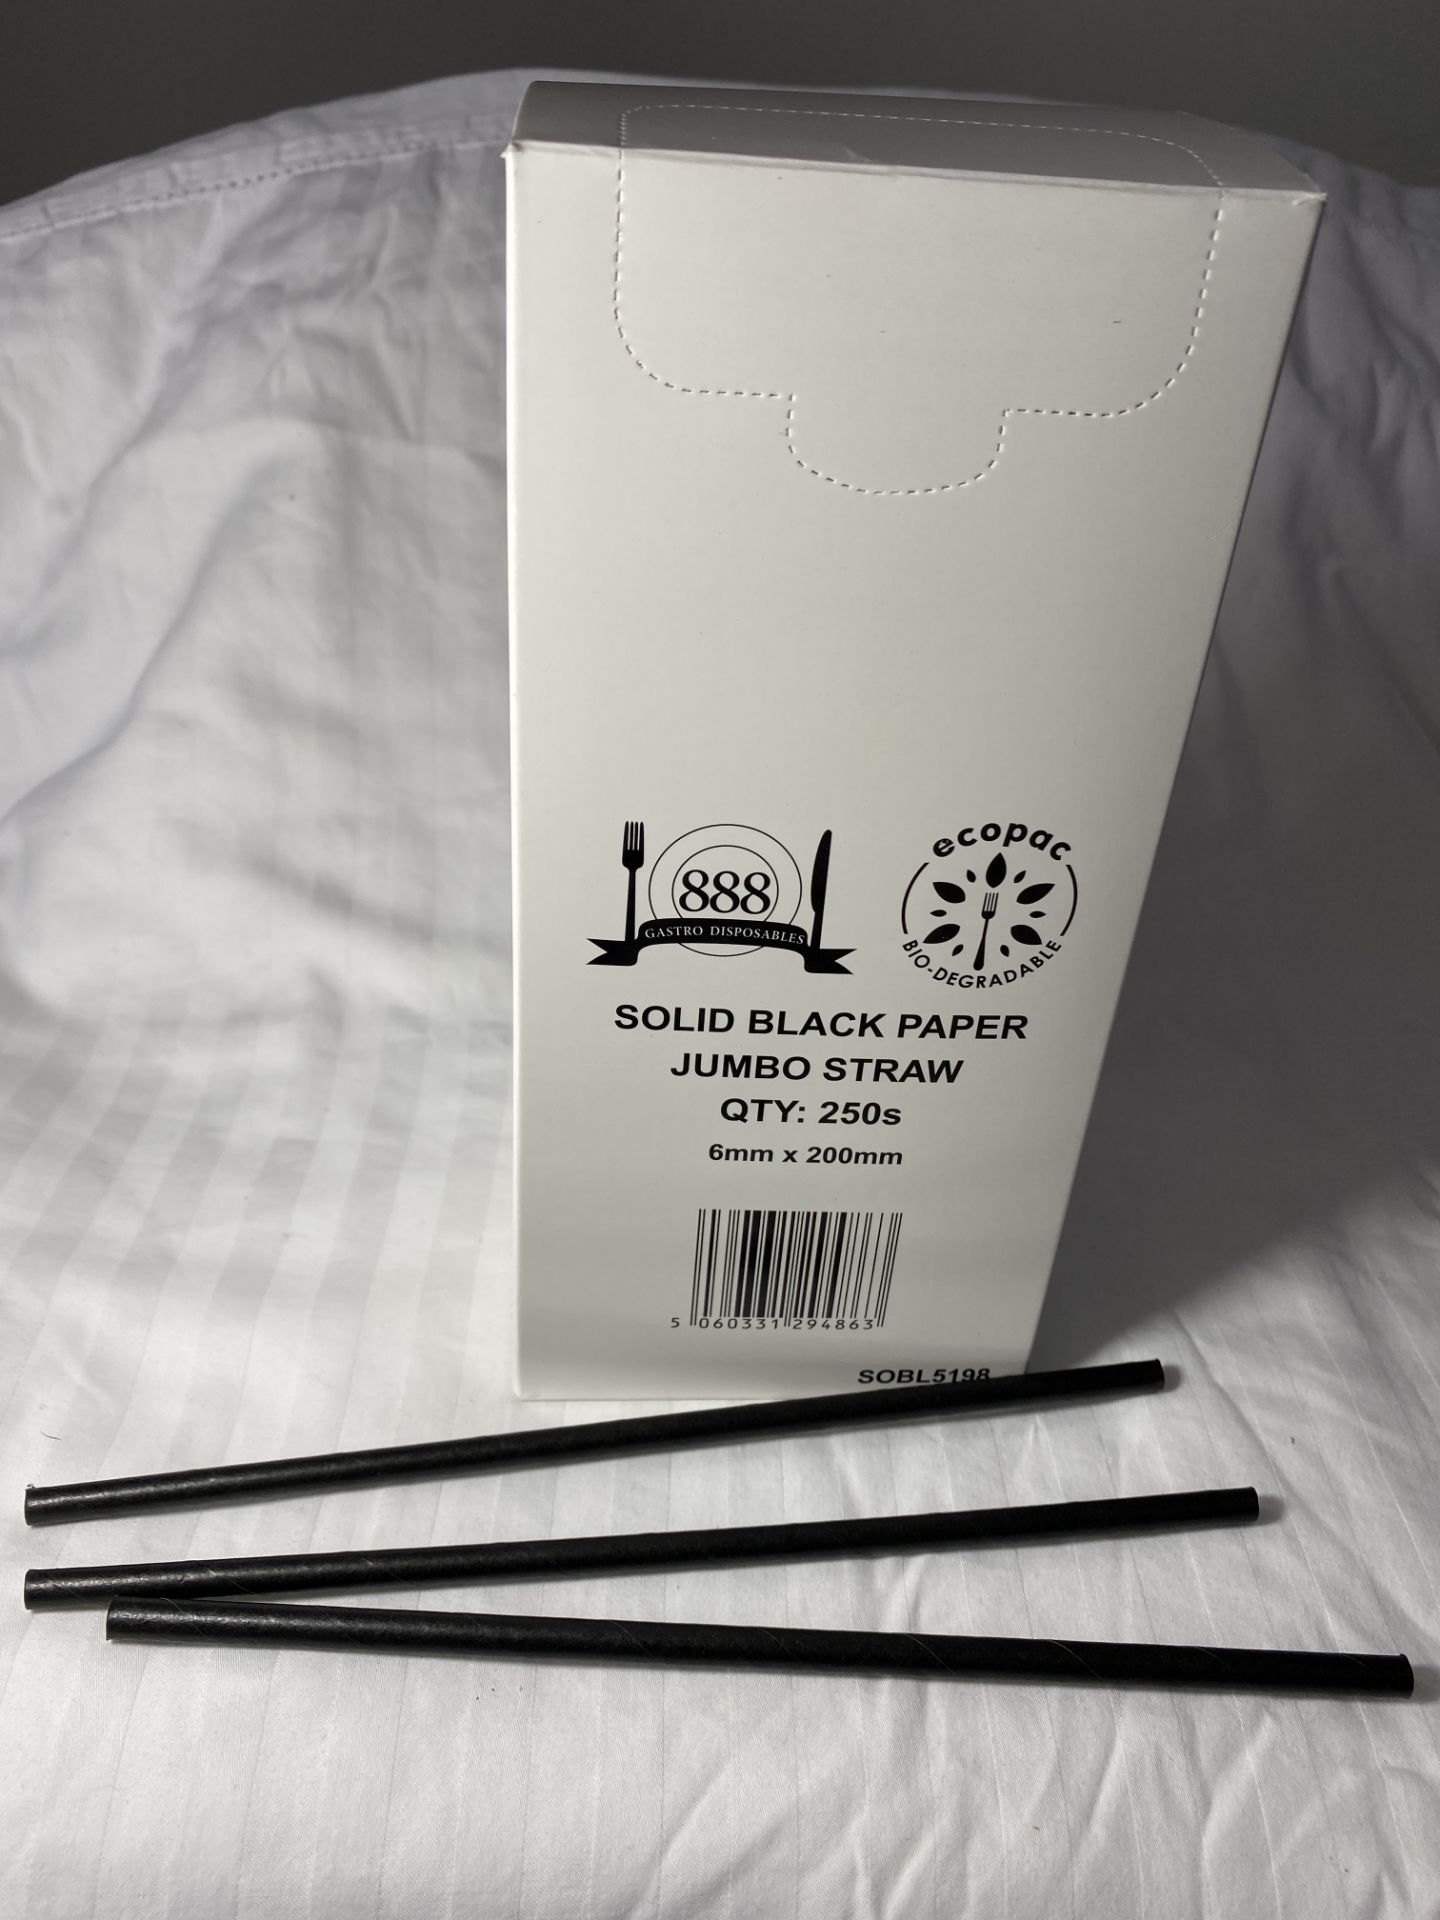 10 x Boxes of Biodegradable Jumbo Straws by 888 Gastro Disposables - Image 4 of 4